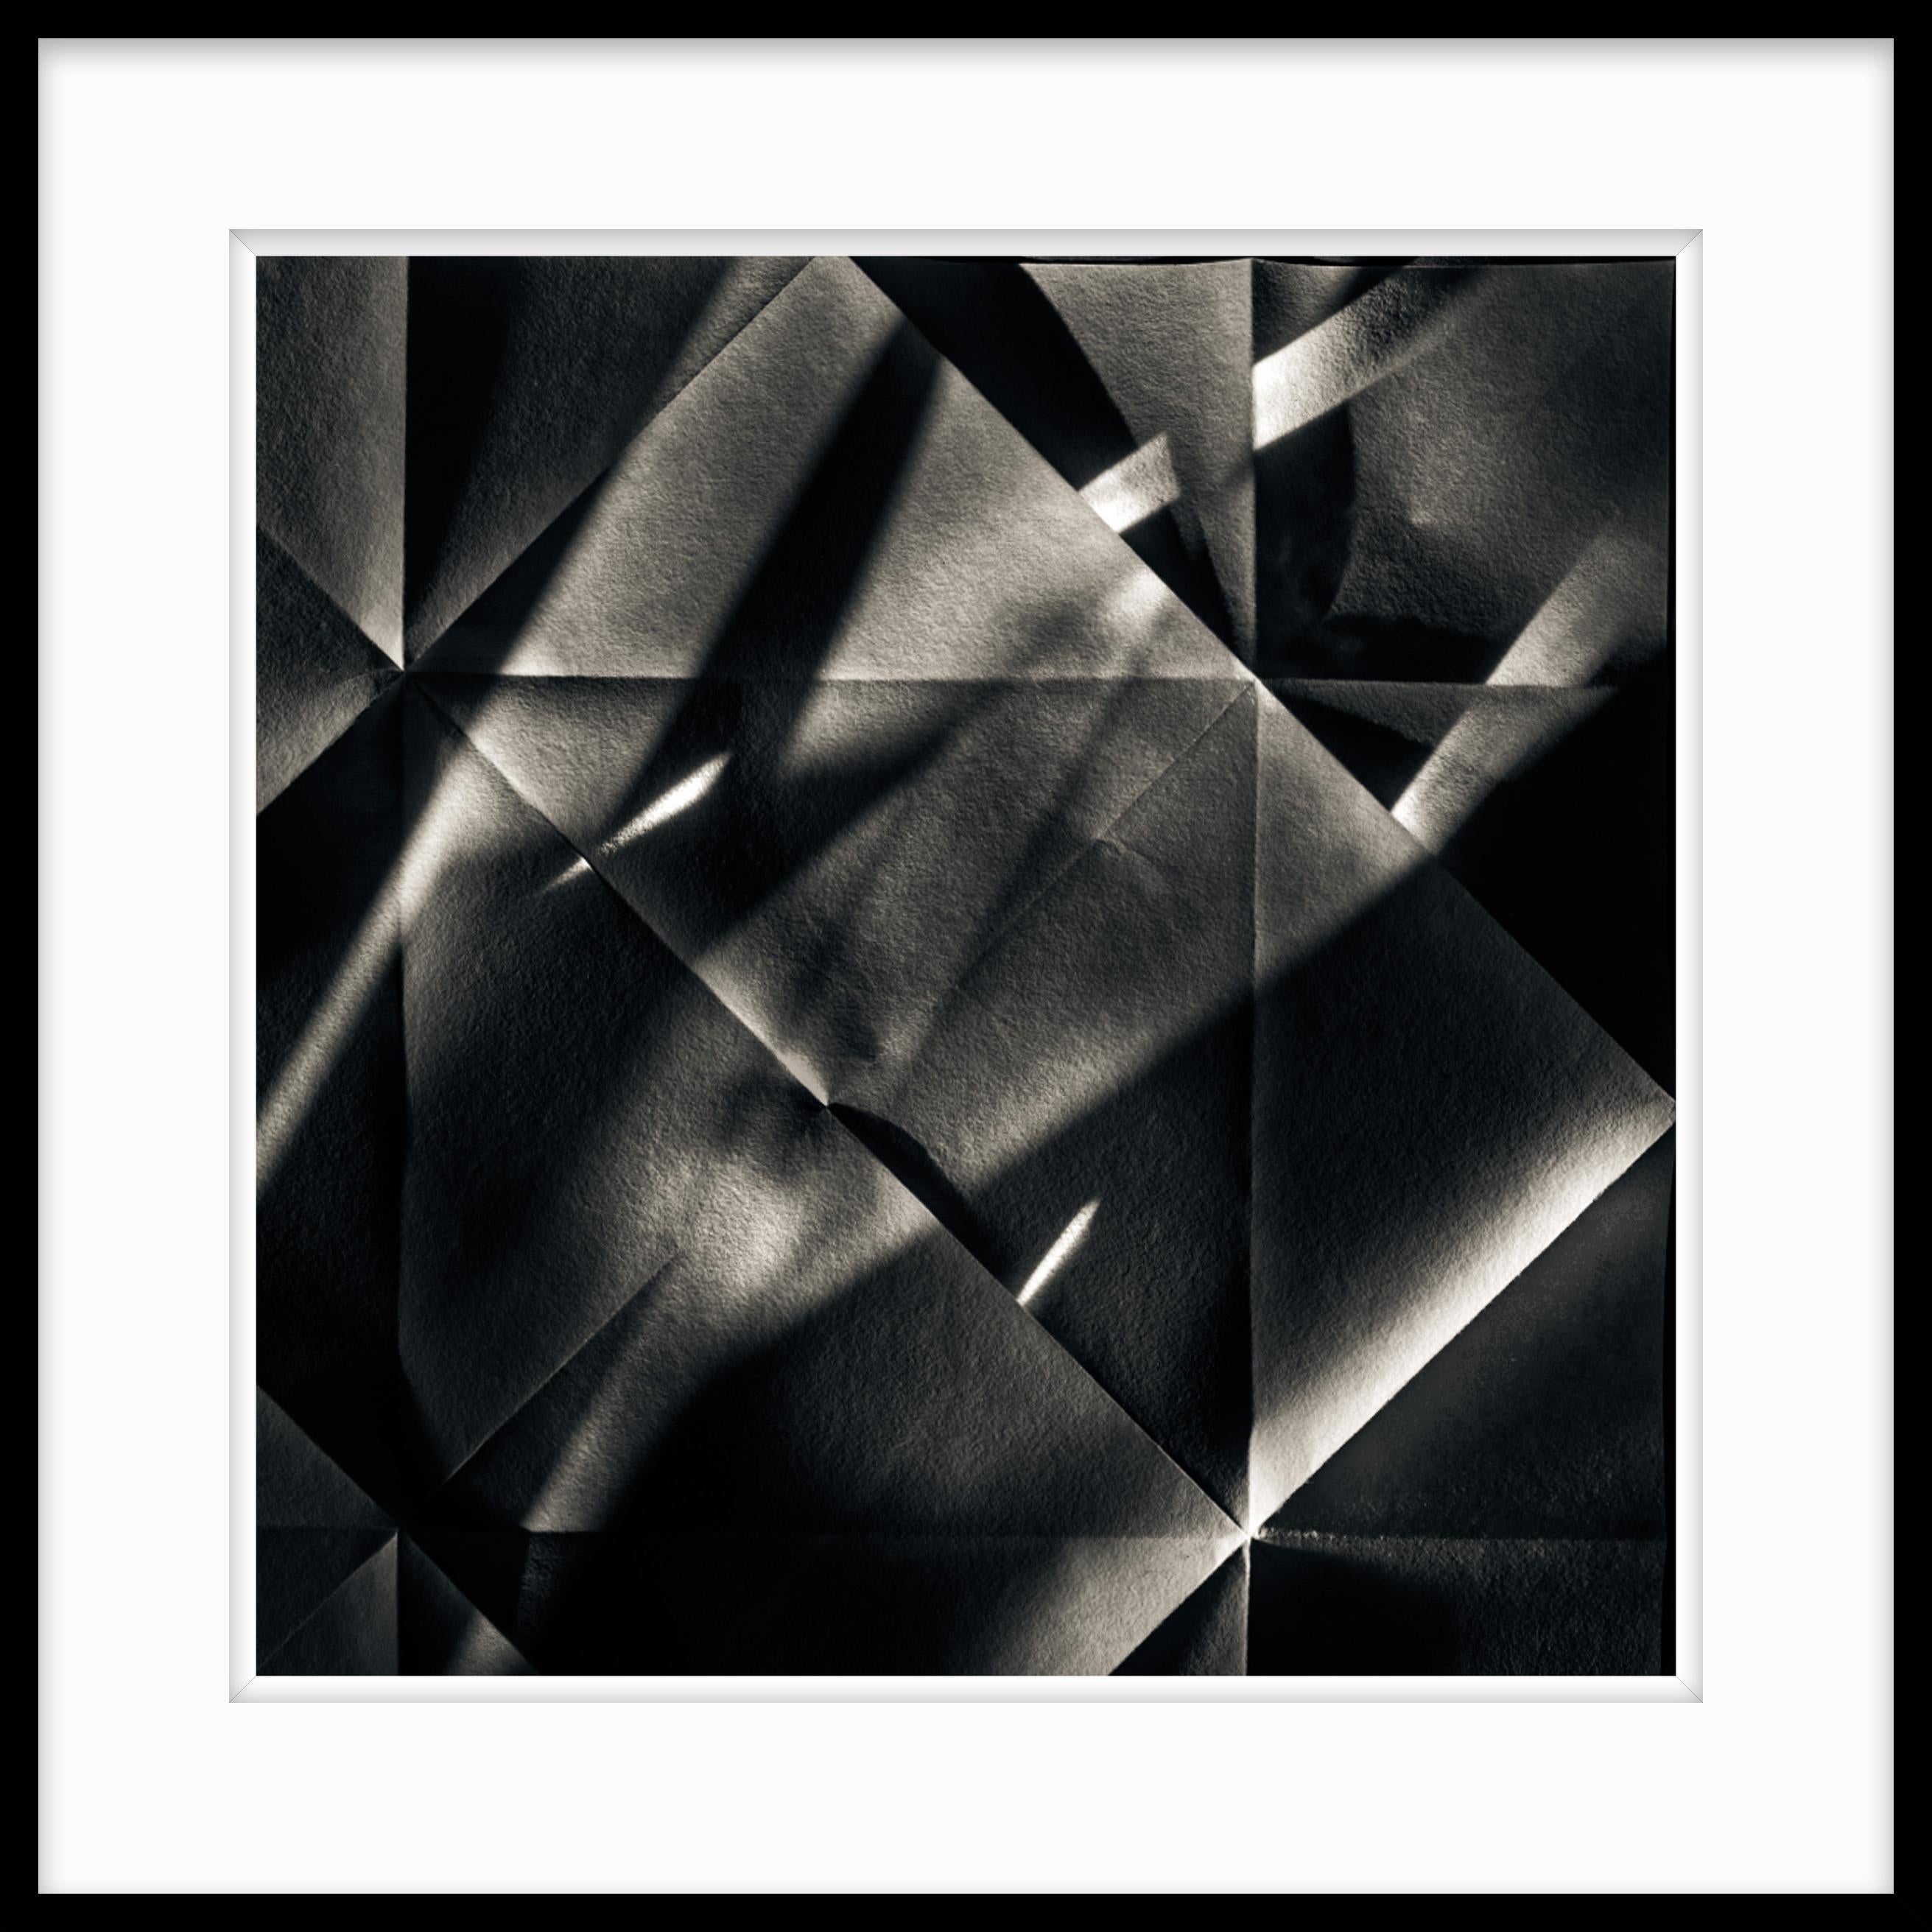  Abstract Photography Black and White - Origami Folds #37 For Sale 1